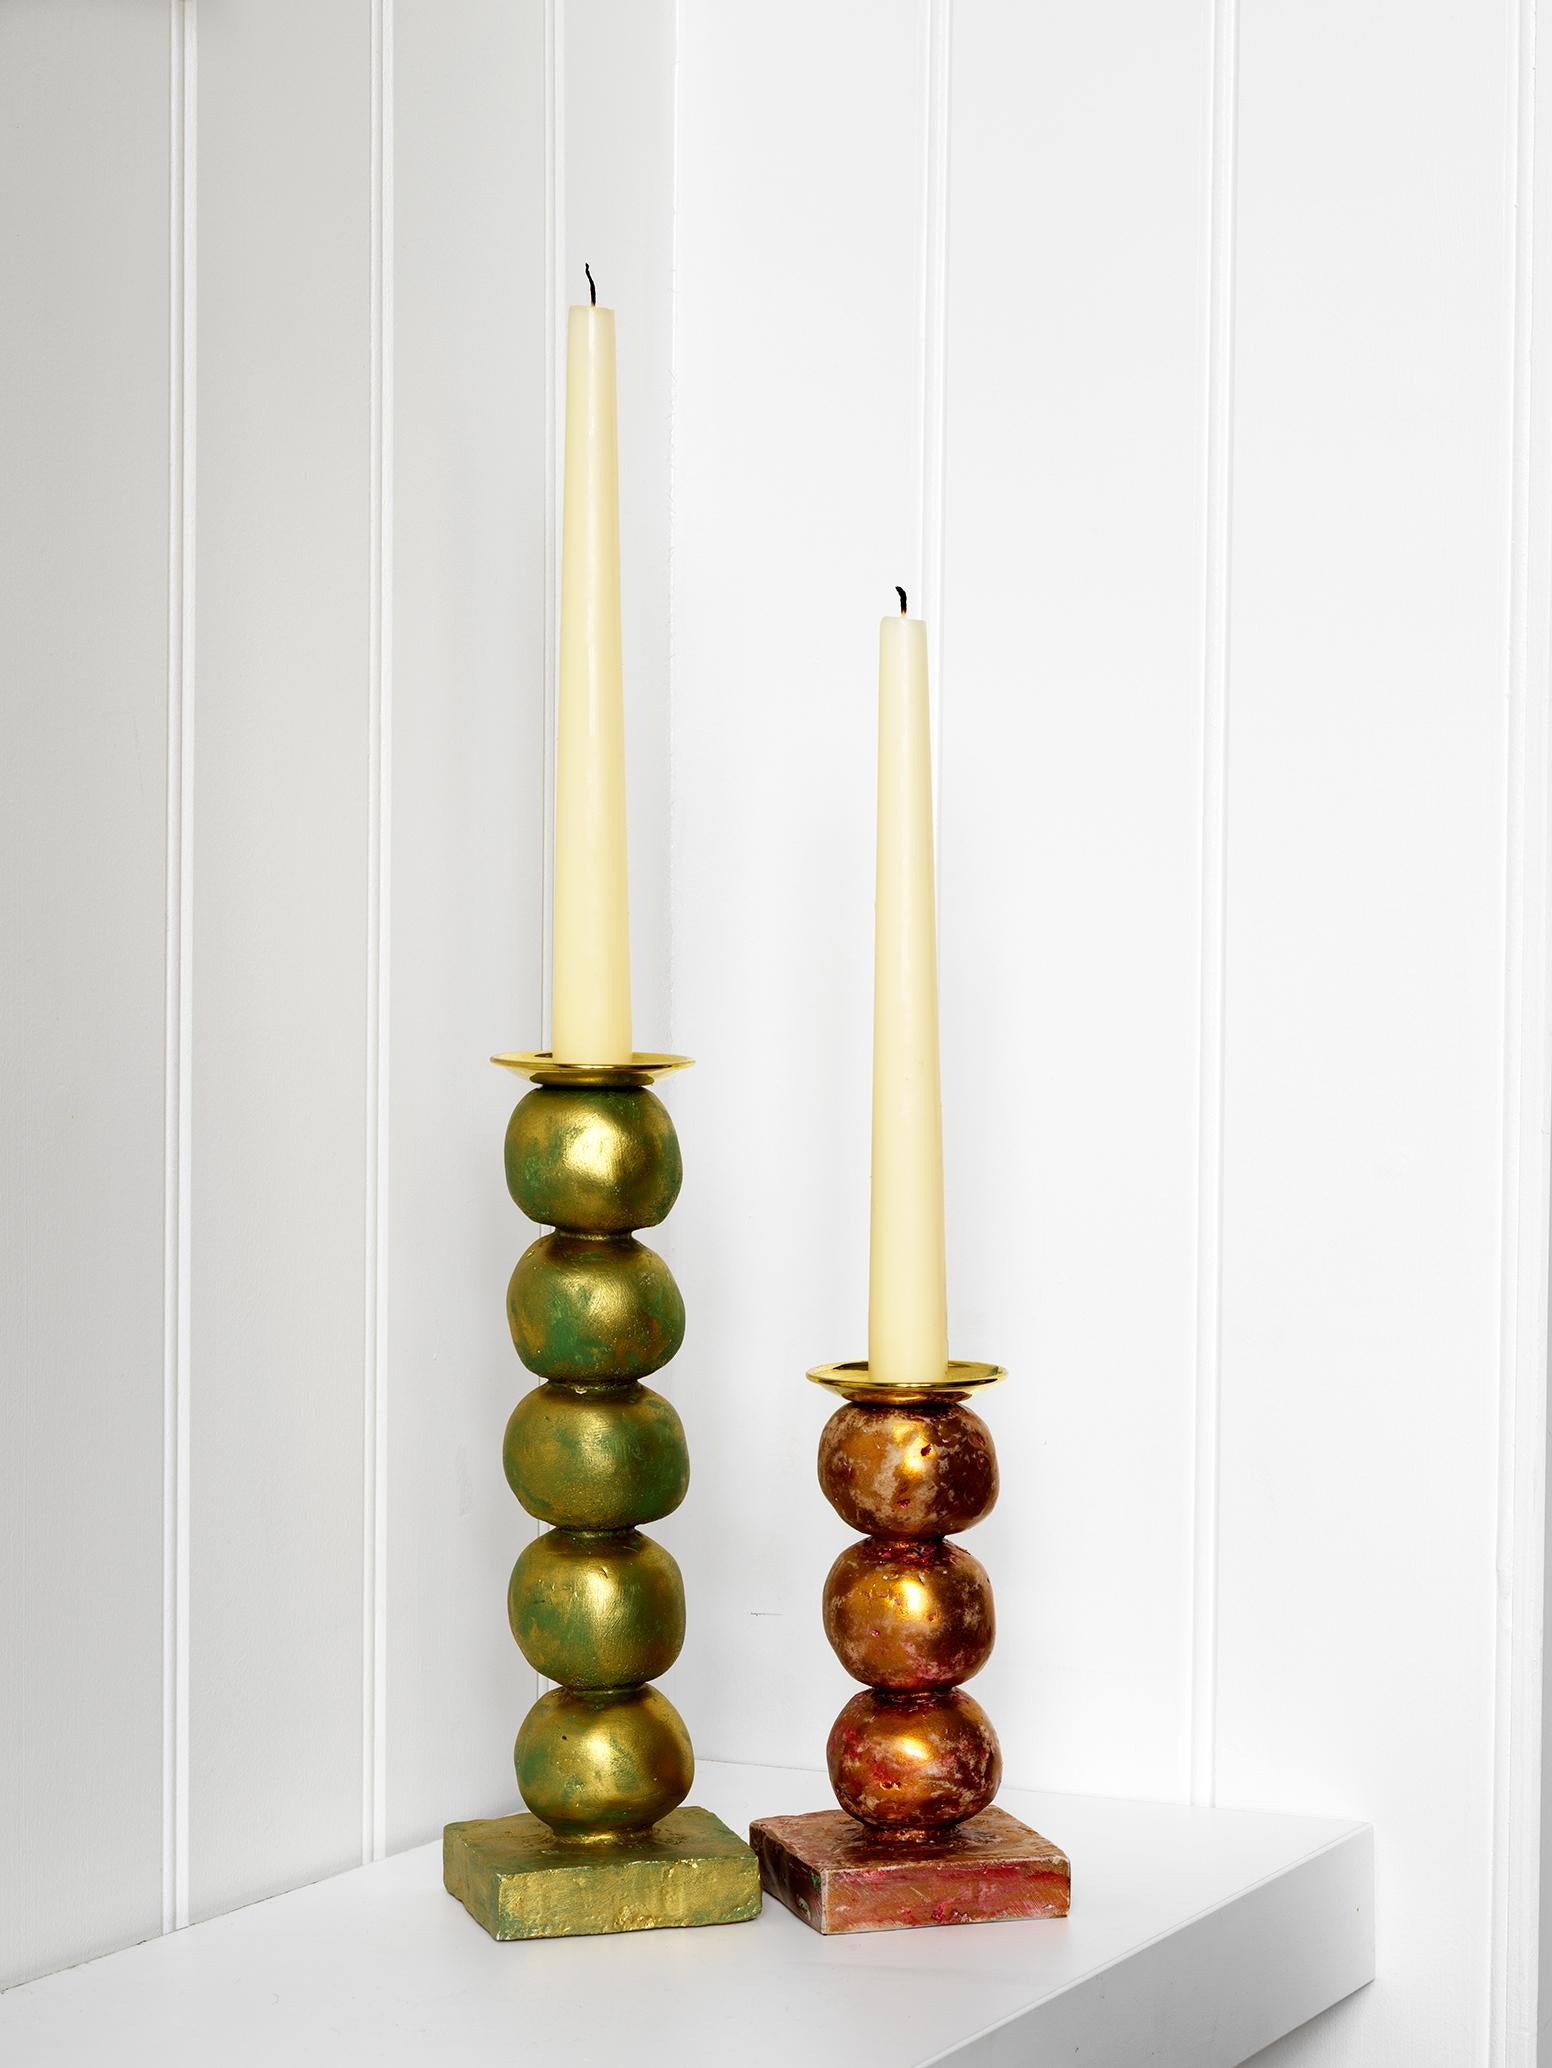 Margit Wittig has used her sculptural skills to create beautifully-crafted, well-proportioned contemporary candlesticks, which are compositions of her unique signature pearl-shaped designs.

Each candlestick begins as hand-sculpted spheres which